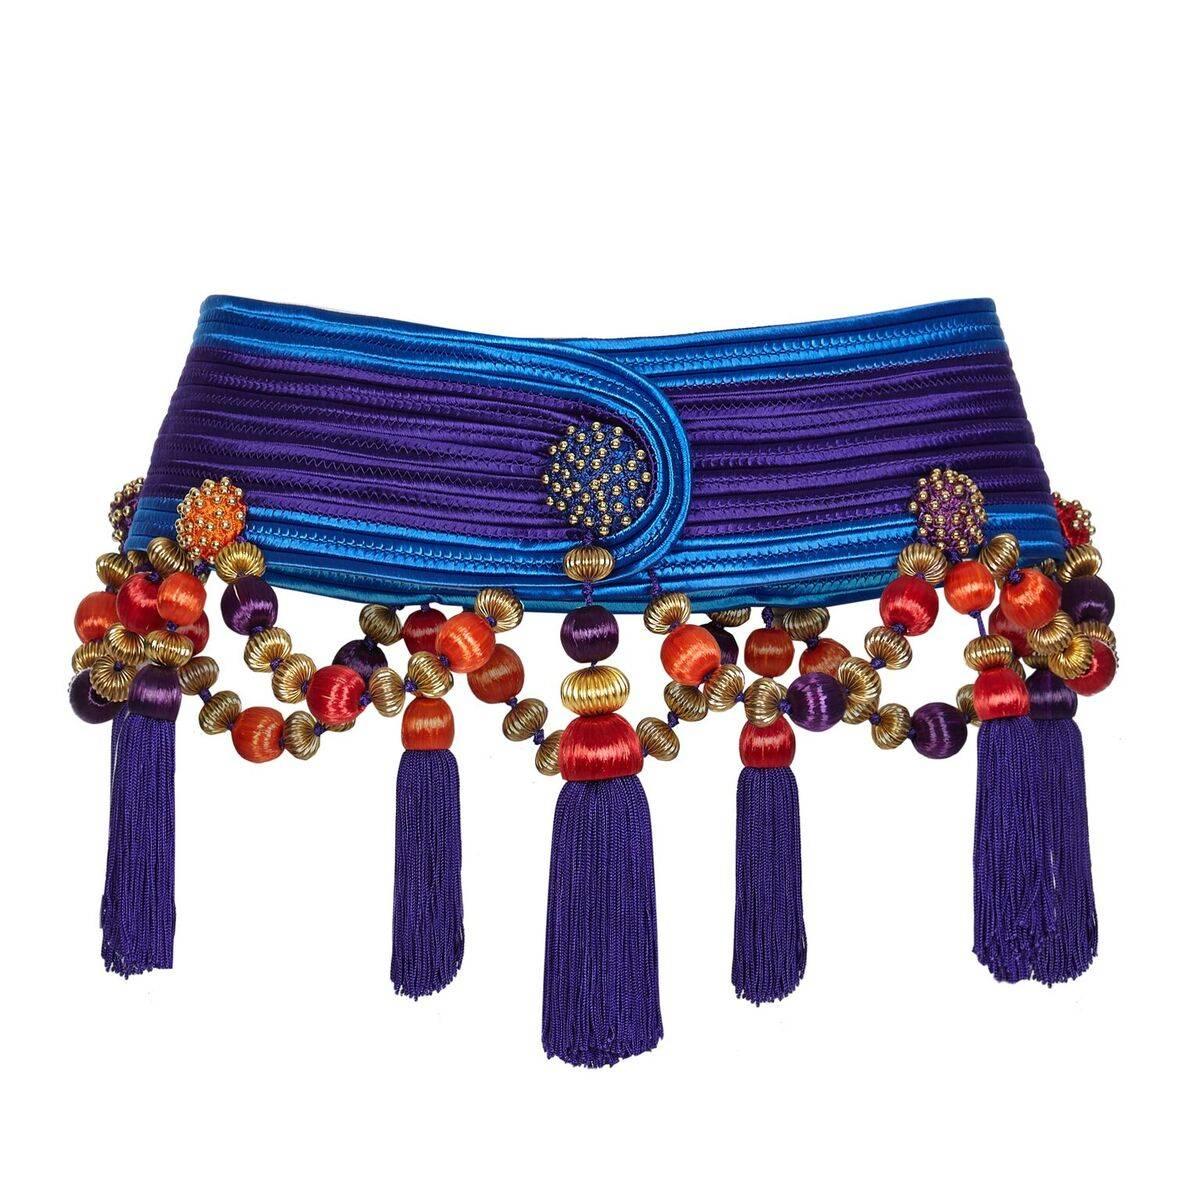 This spectacular Yves Saint Laurent vintage purple woven tassel statement belt is from the 1991 Rive Gauche collection. Constructed in a silk cotton weave, the belt is  3.2 